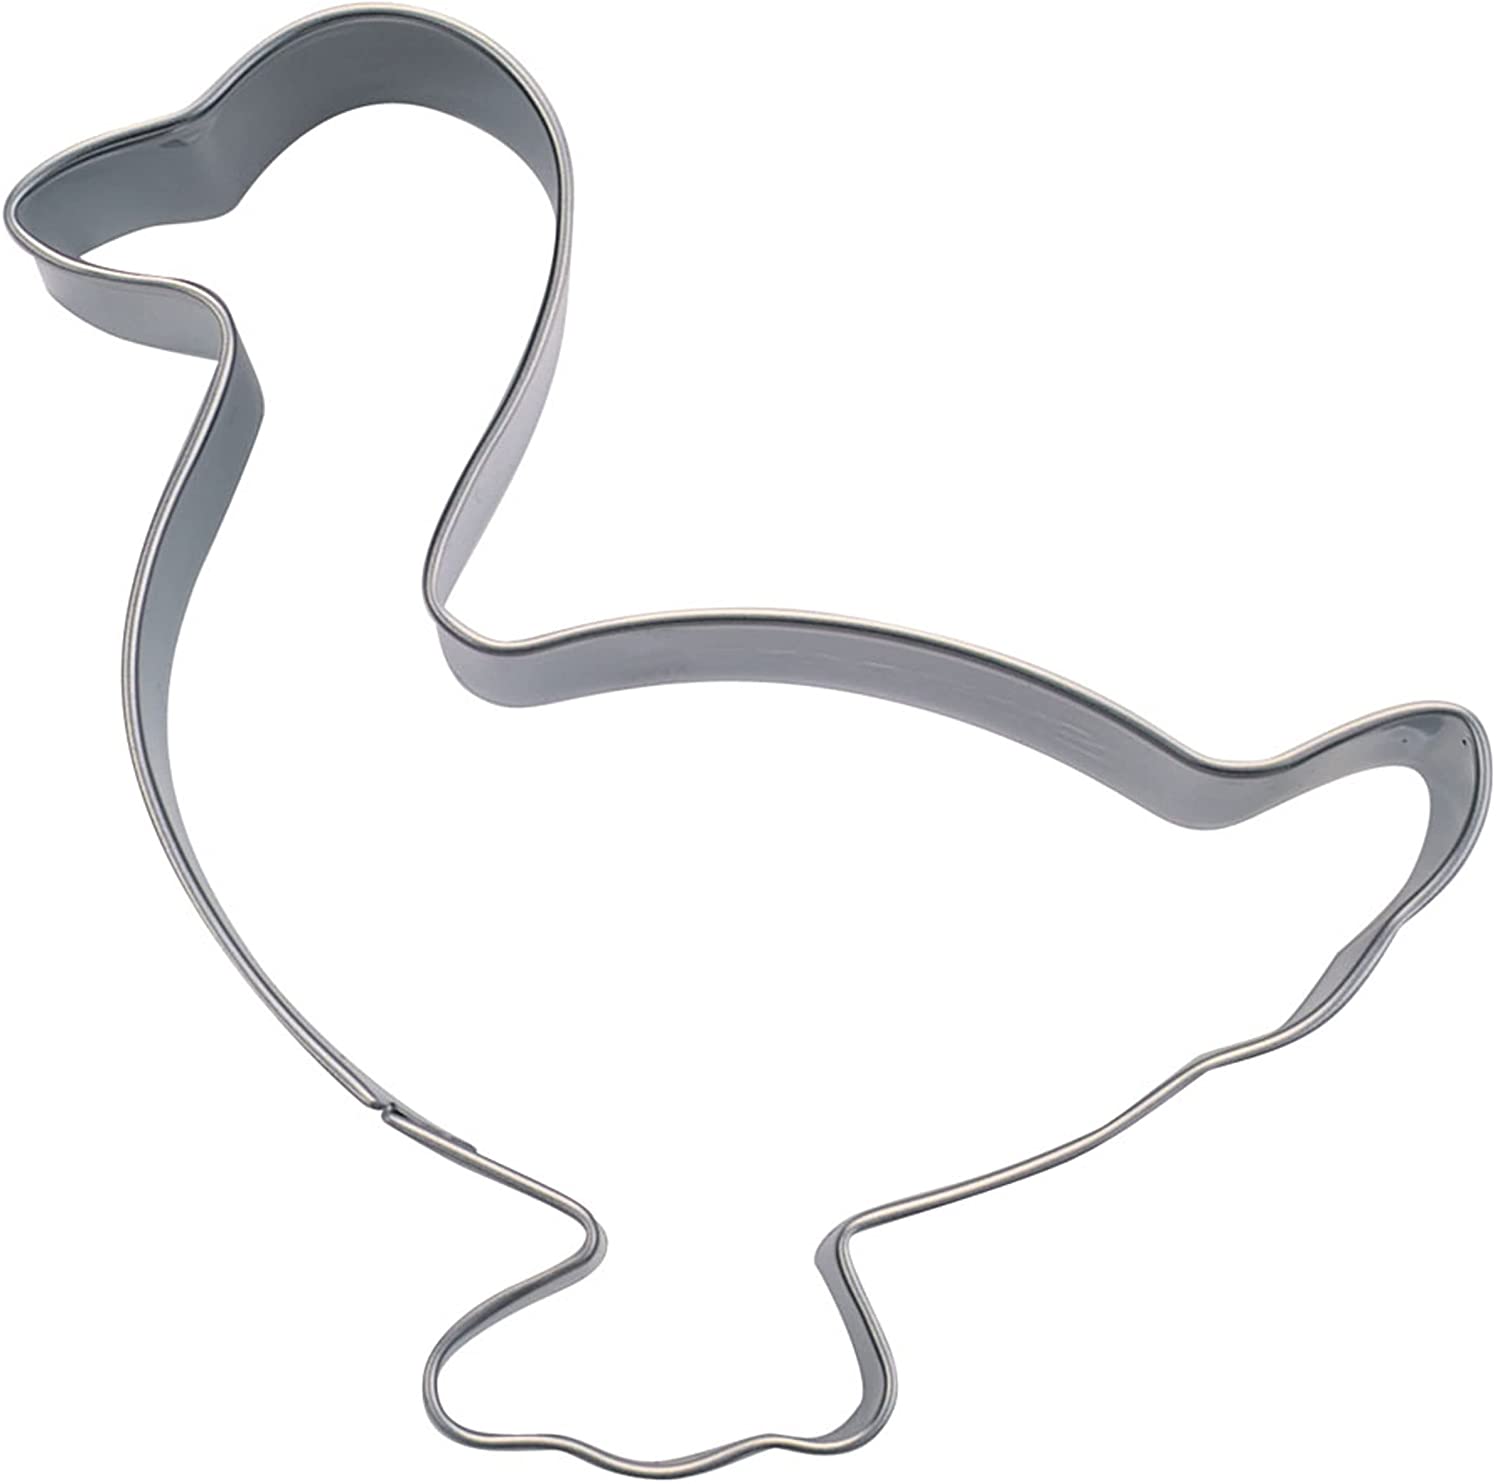 Staedter Goose Biscuit Cutter, Stainless Steel, Silver, 10 cm